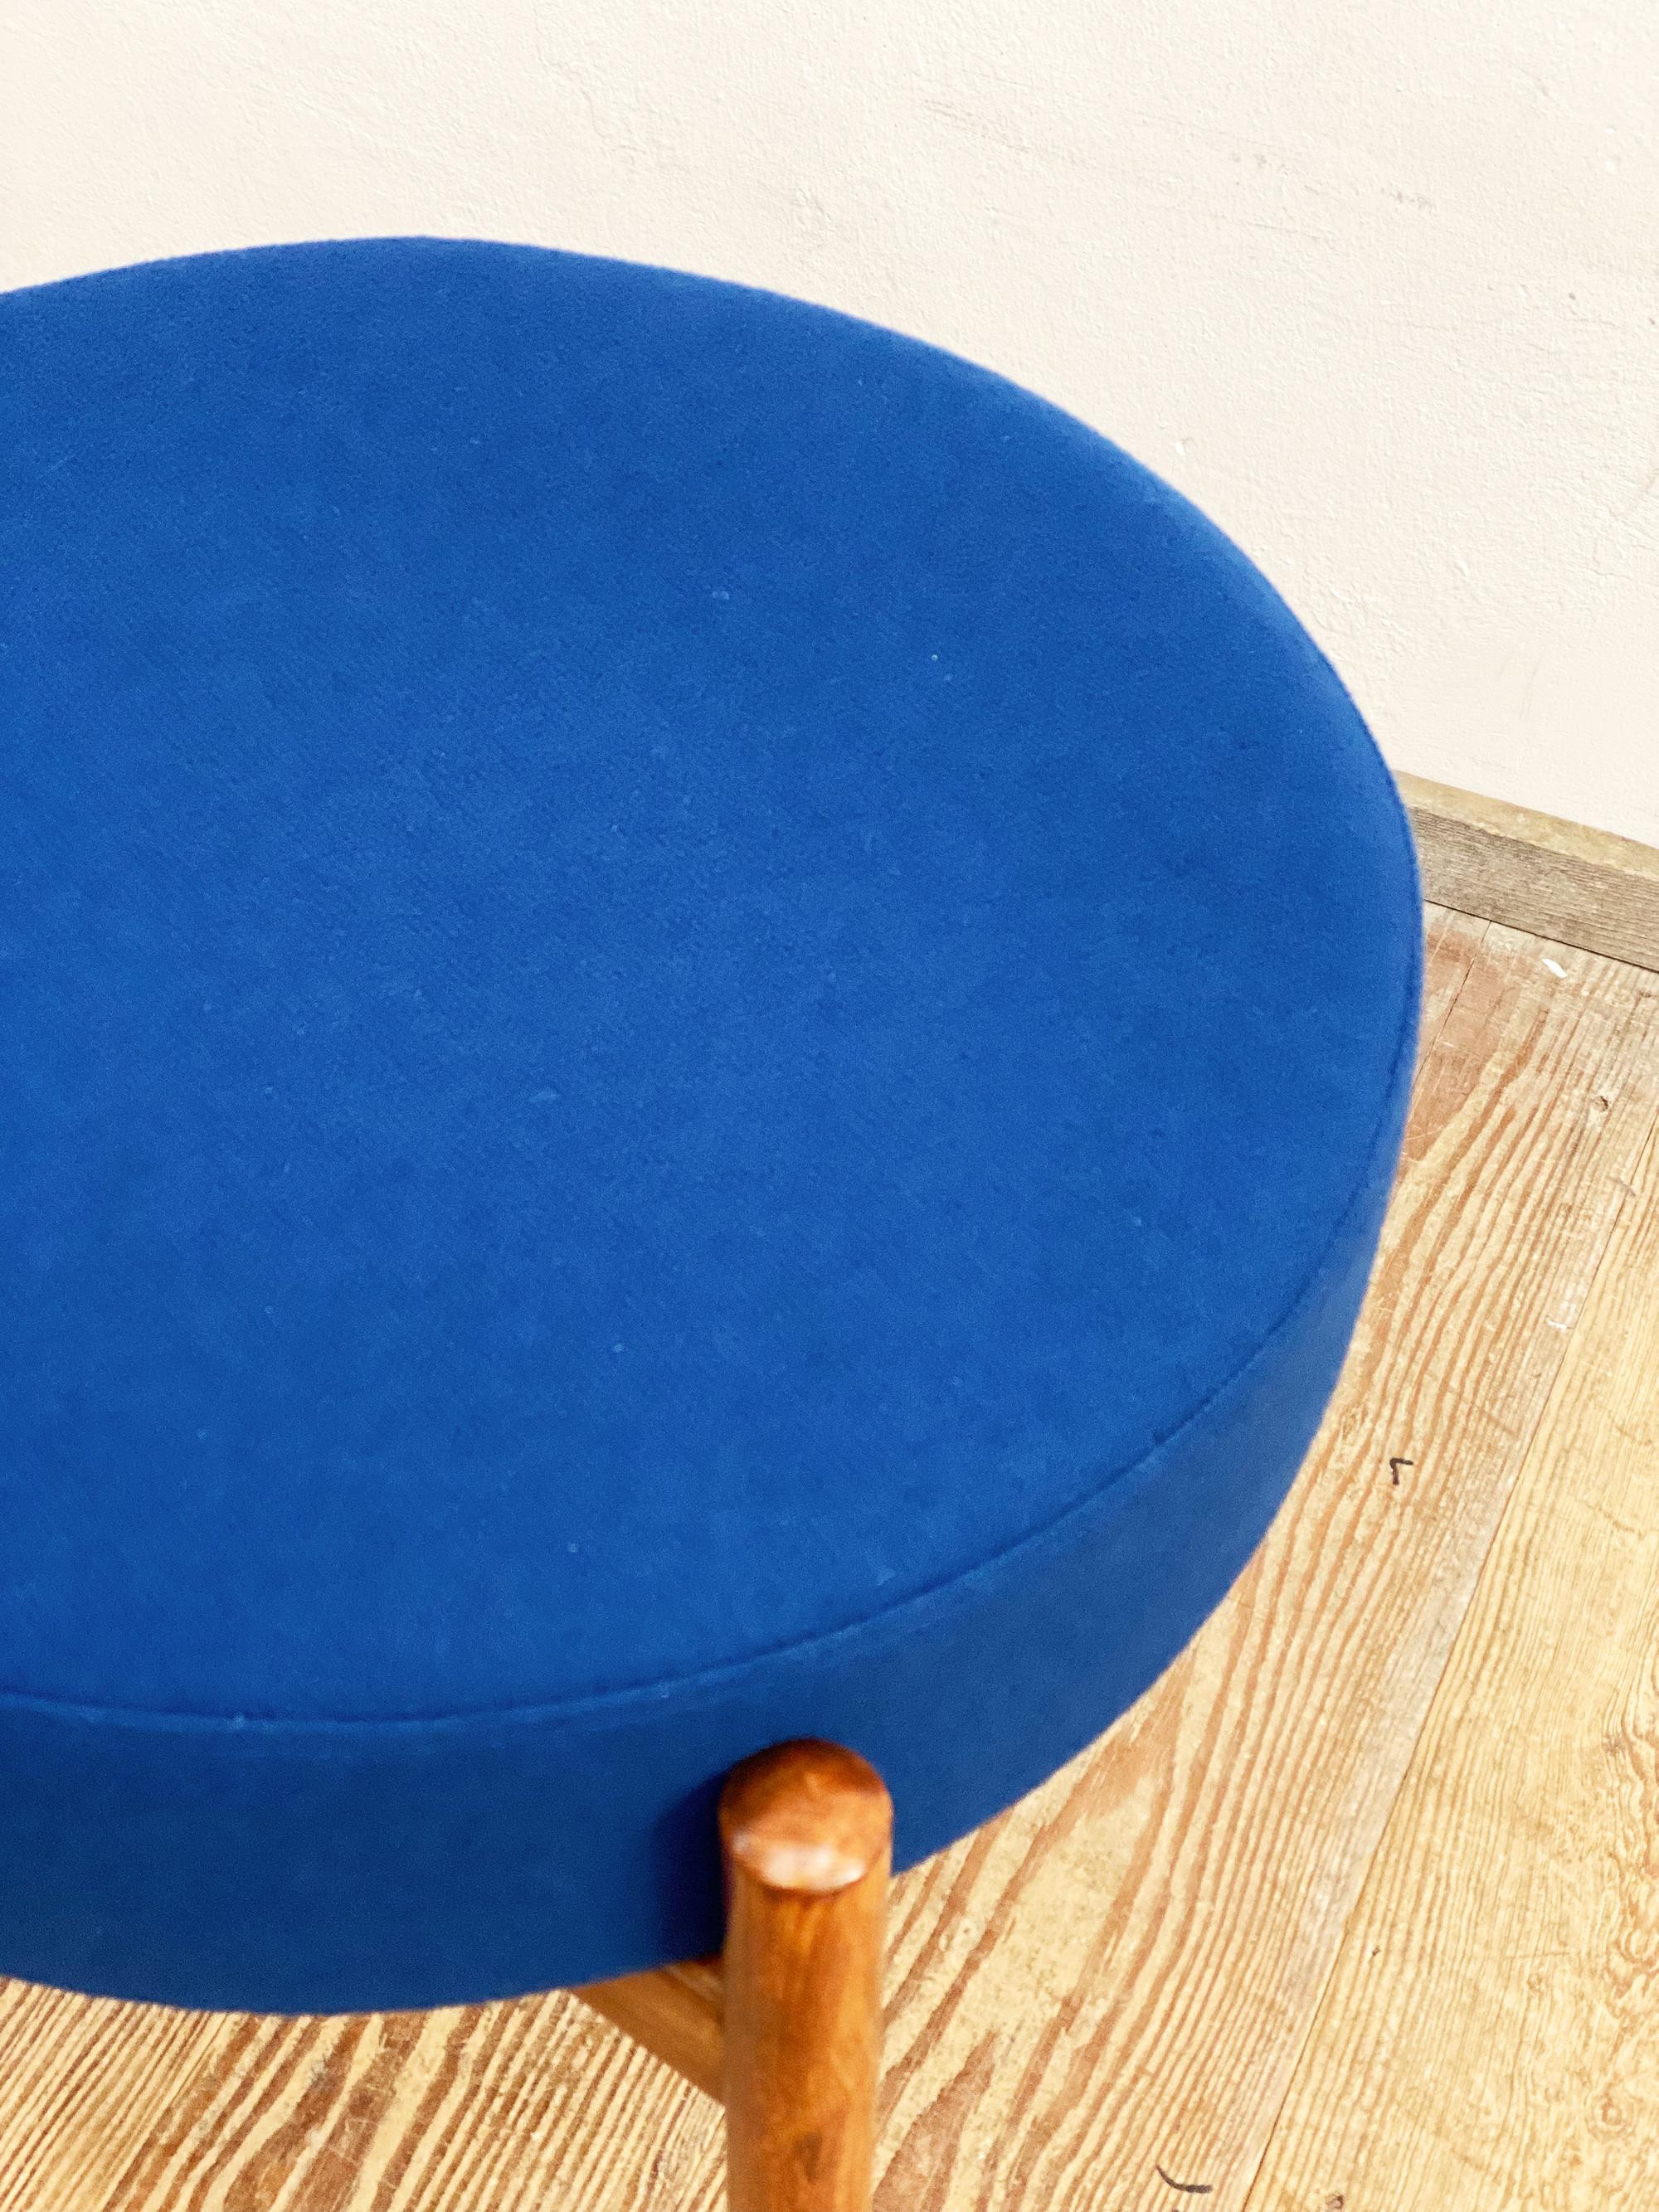 Mid-20th Century Danish Mid-Century Design Teak Stool or Round Foot Rest with Blue Upholstery